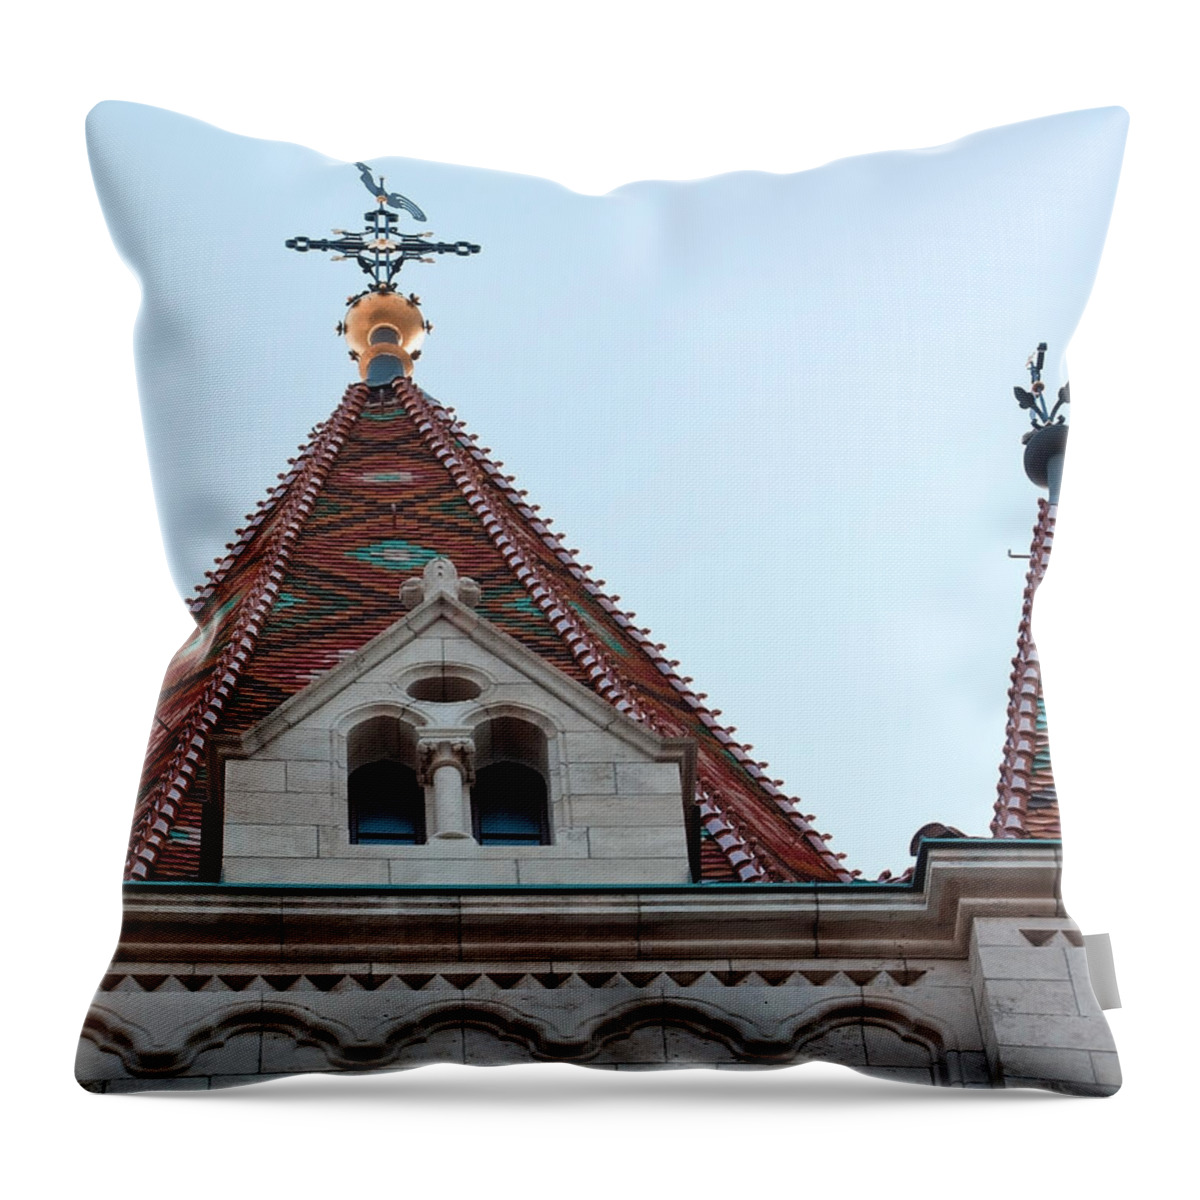 Budapest Old Town Throw Pillow featuring the photograph Matthias Church by Shirley Mitchell